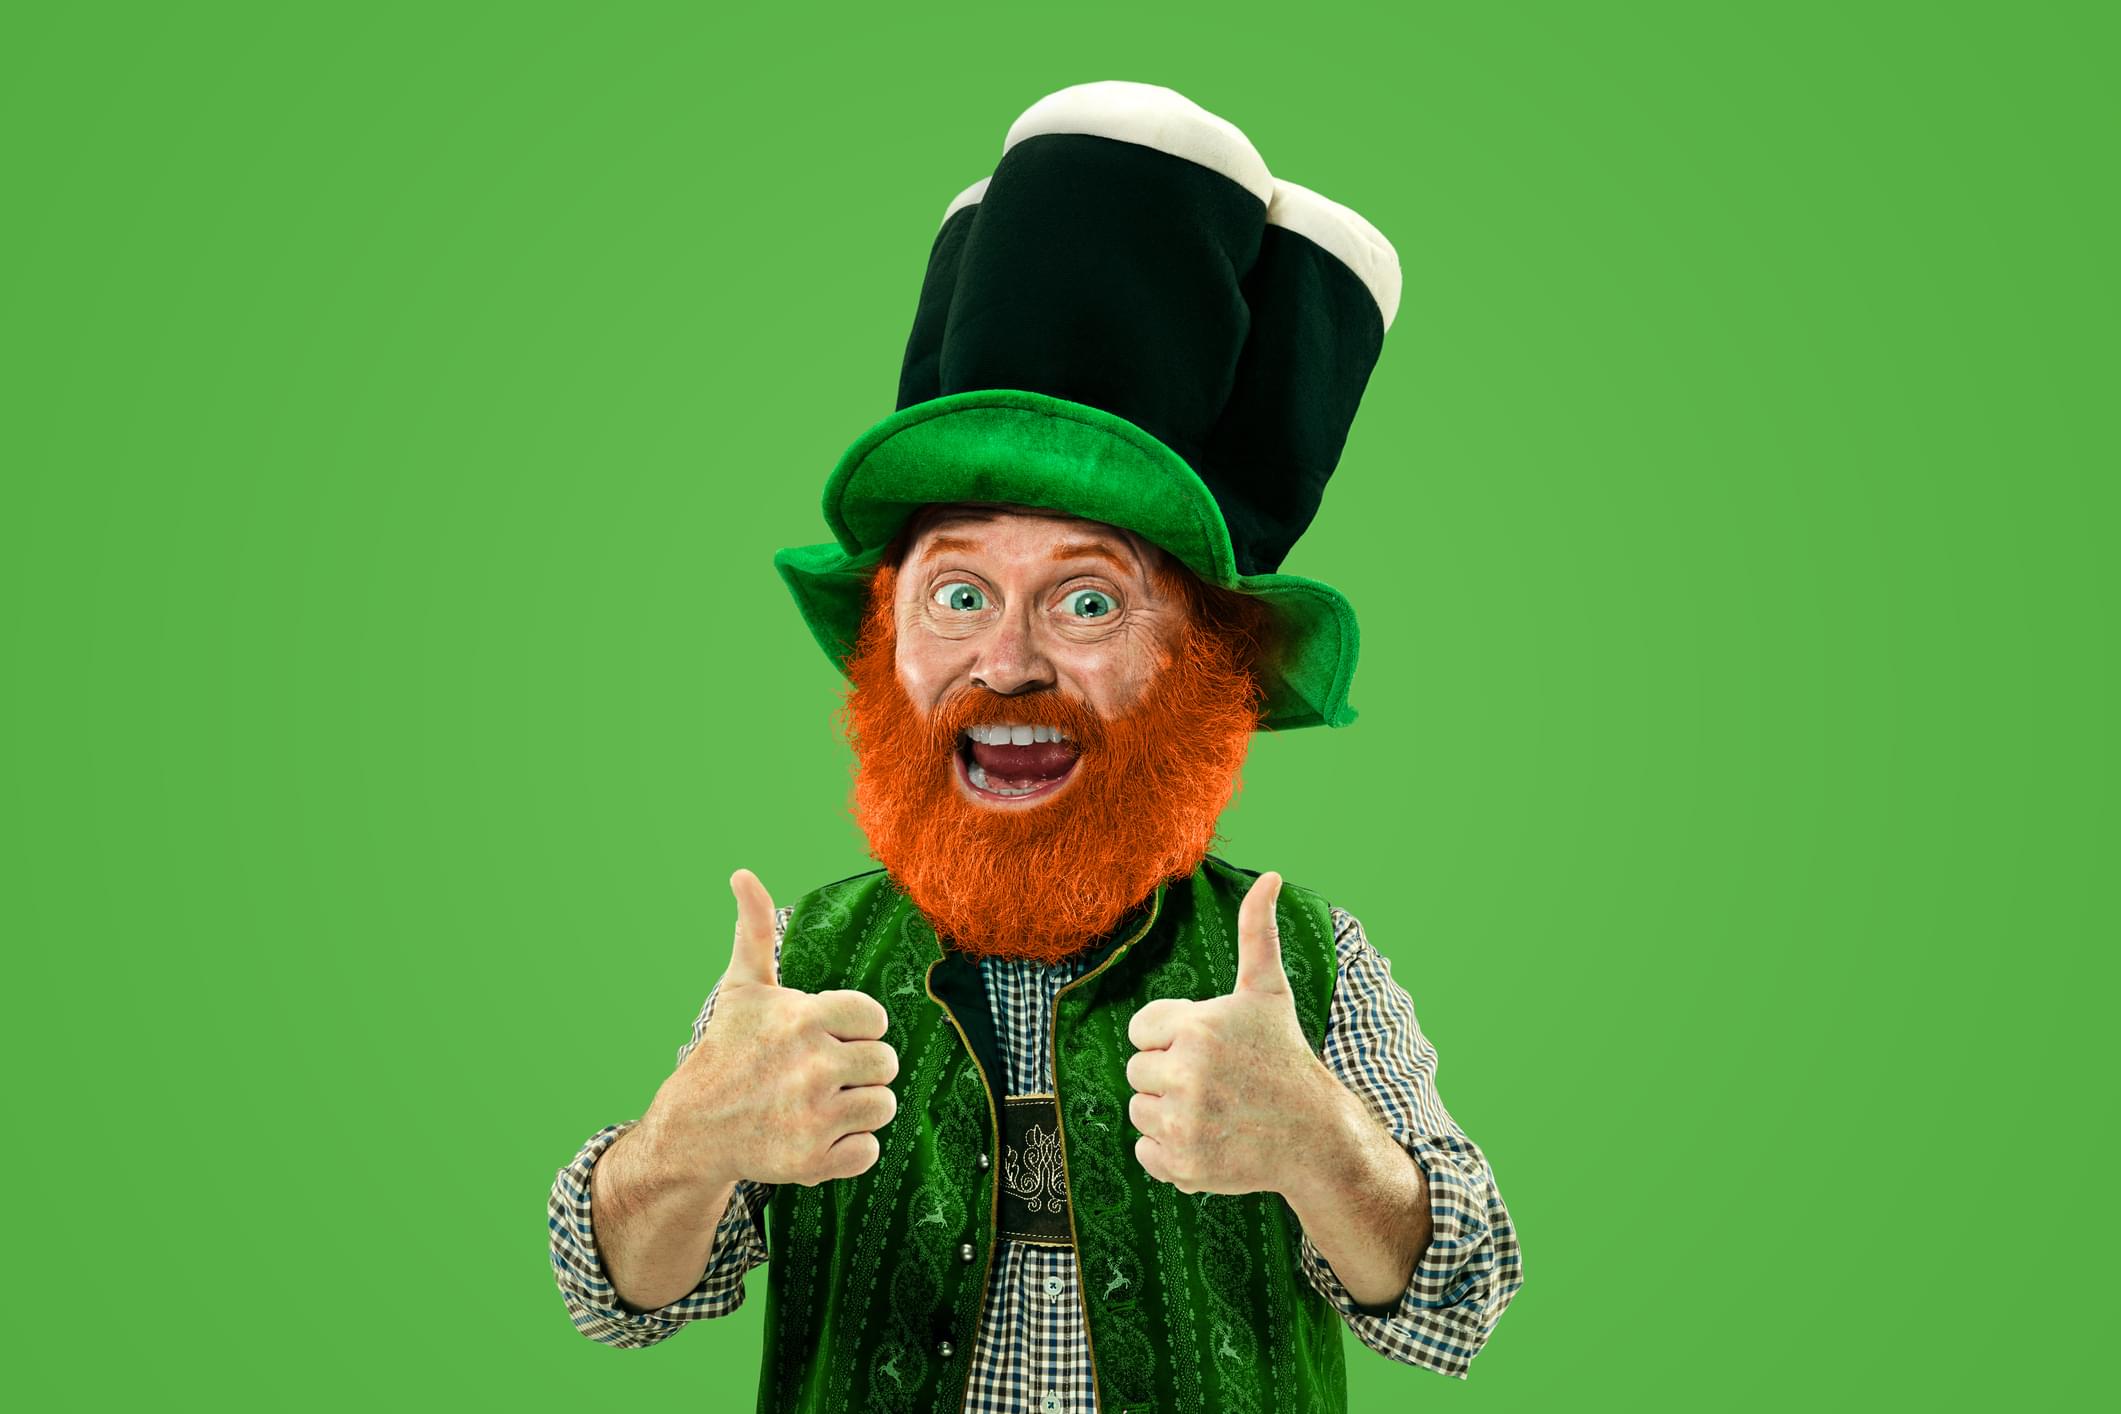 Do You Think You Know Everything There Is To Know About Leprechauns?